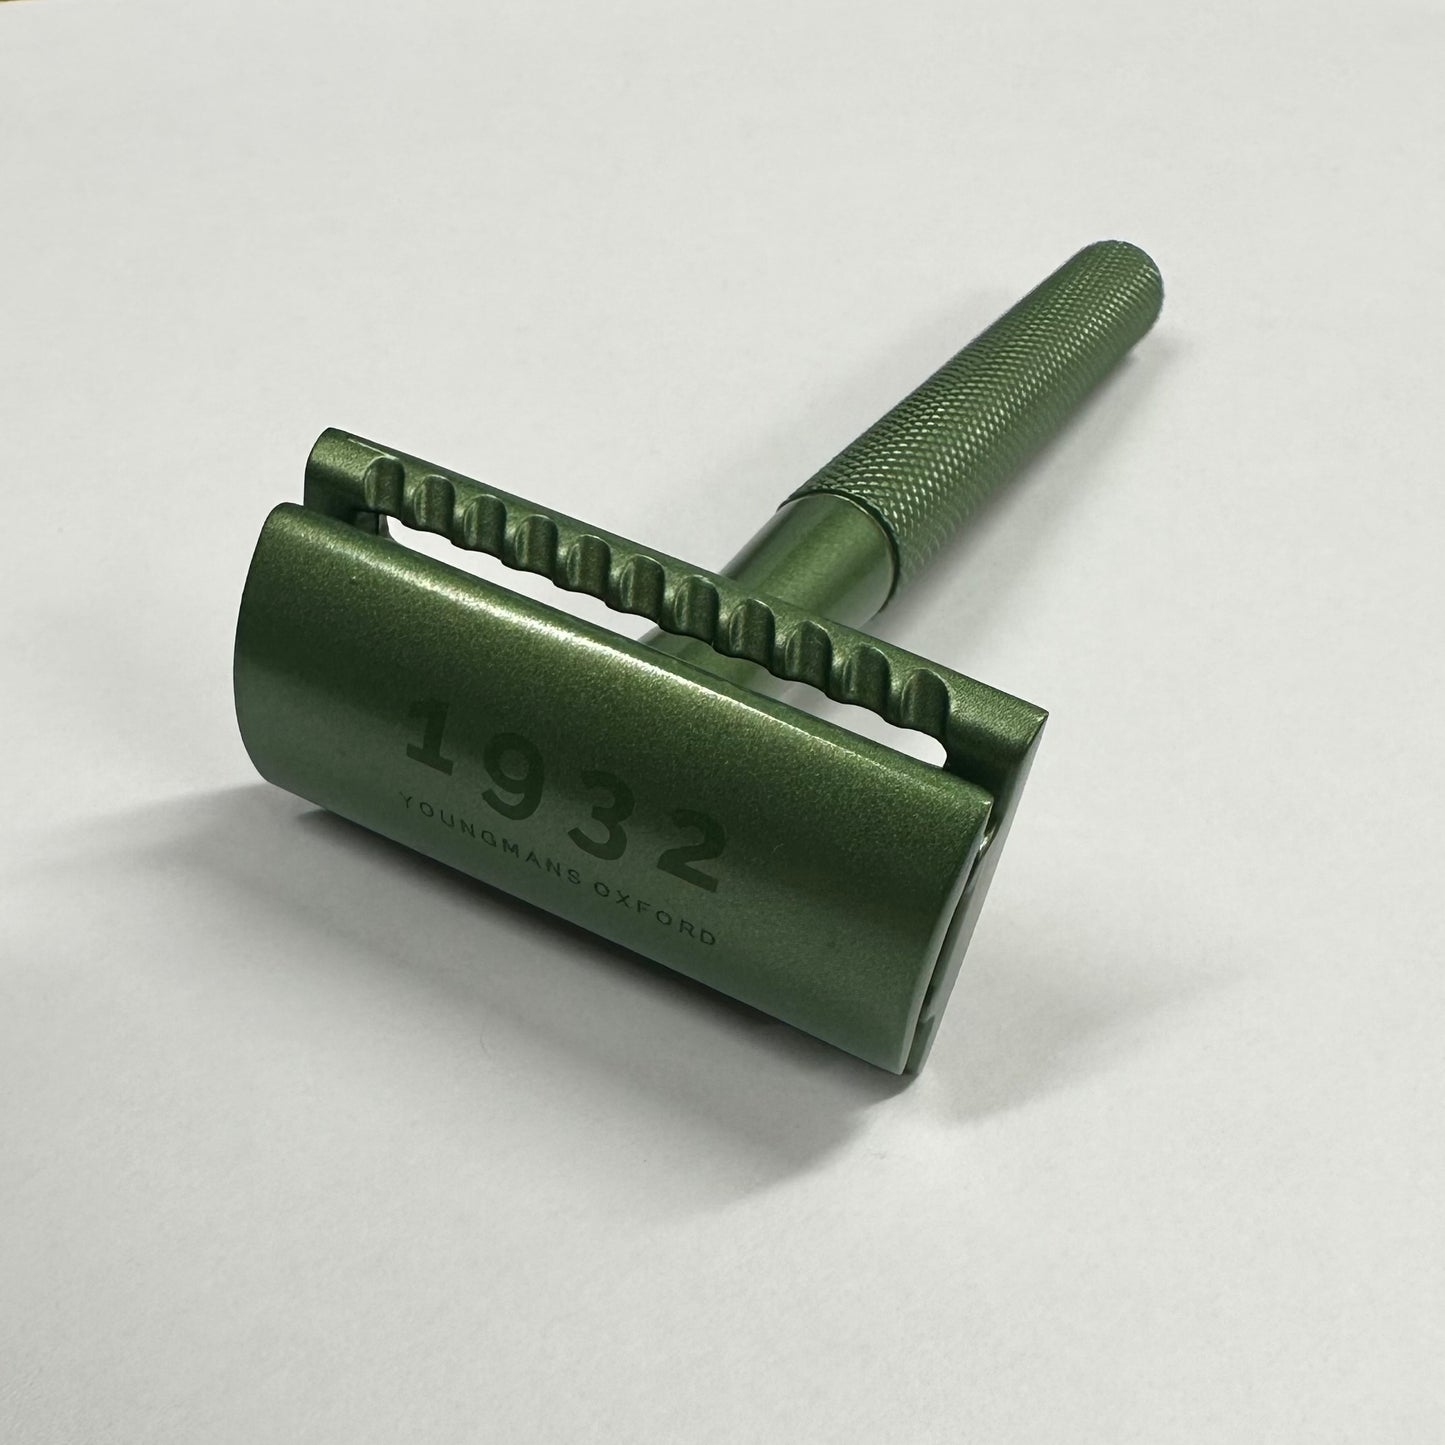 LIMITED EDITION 1932 Green Stainless Steel Safety Razor